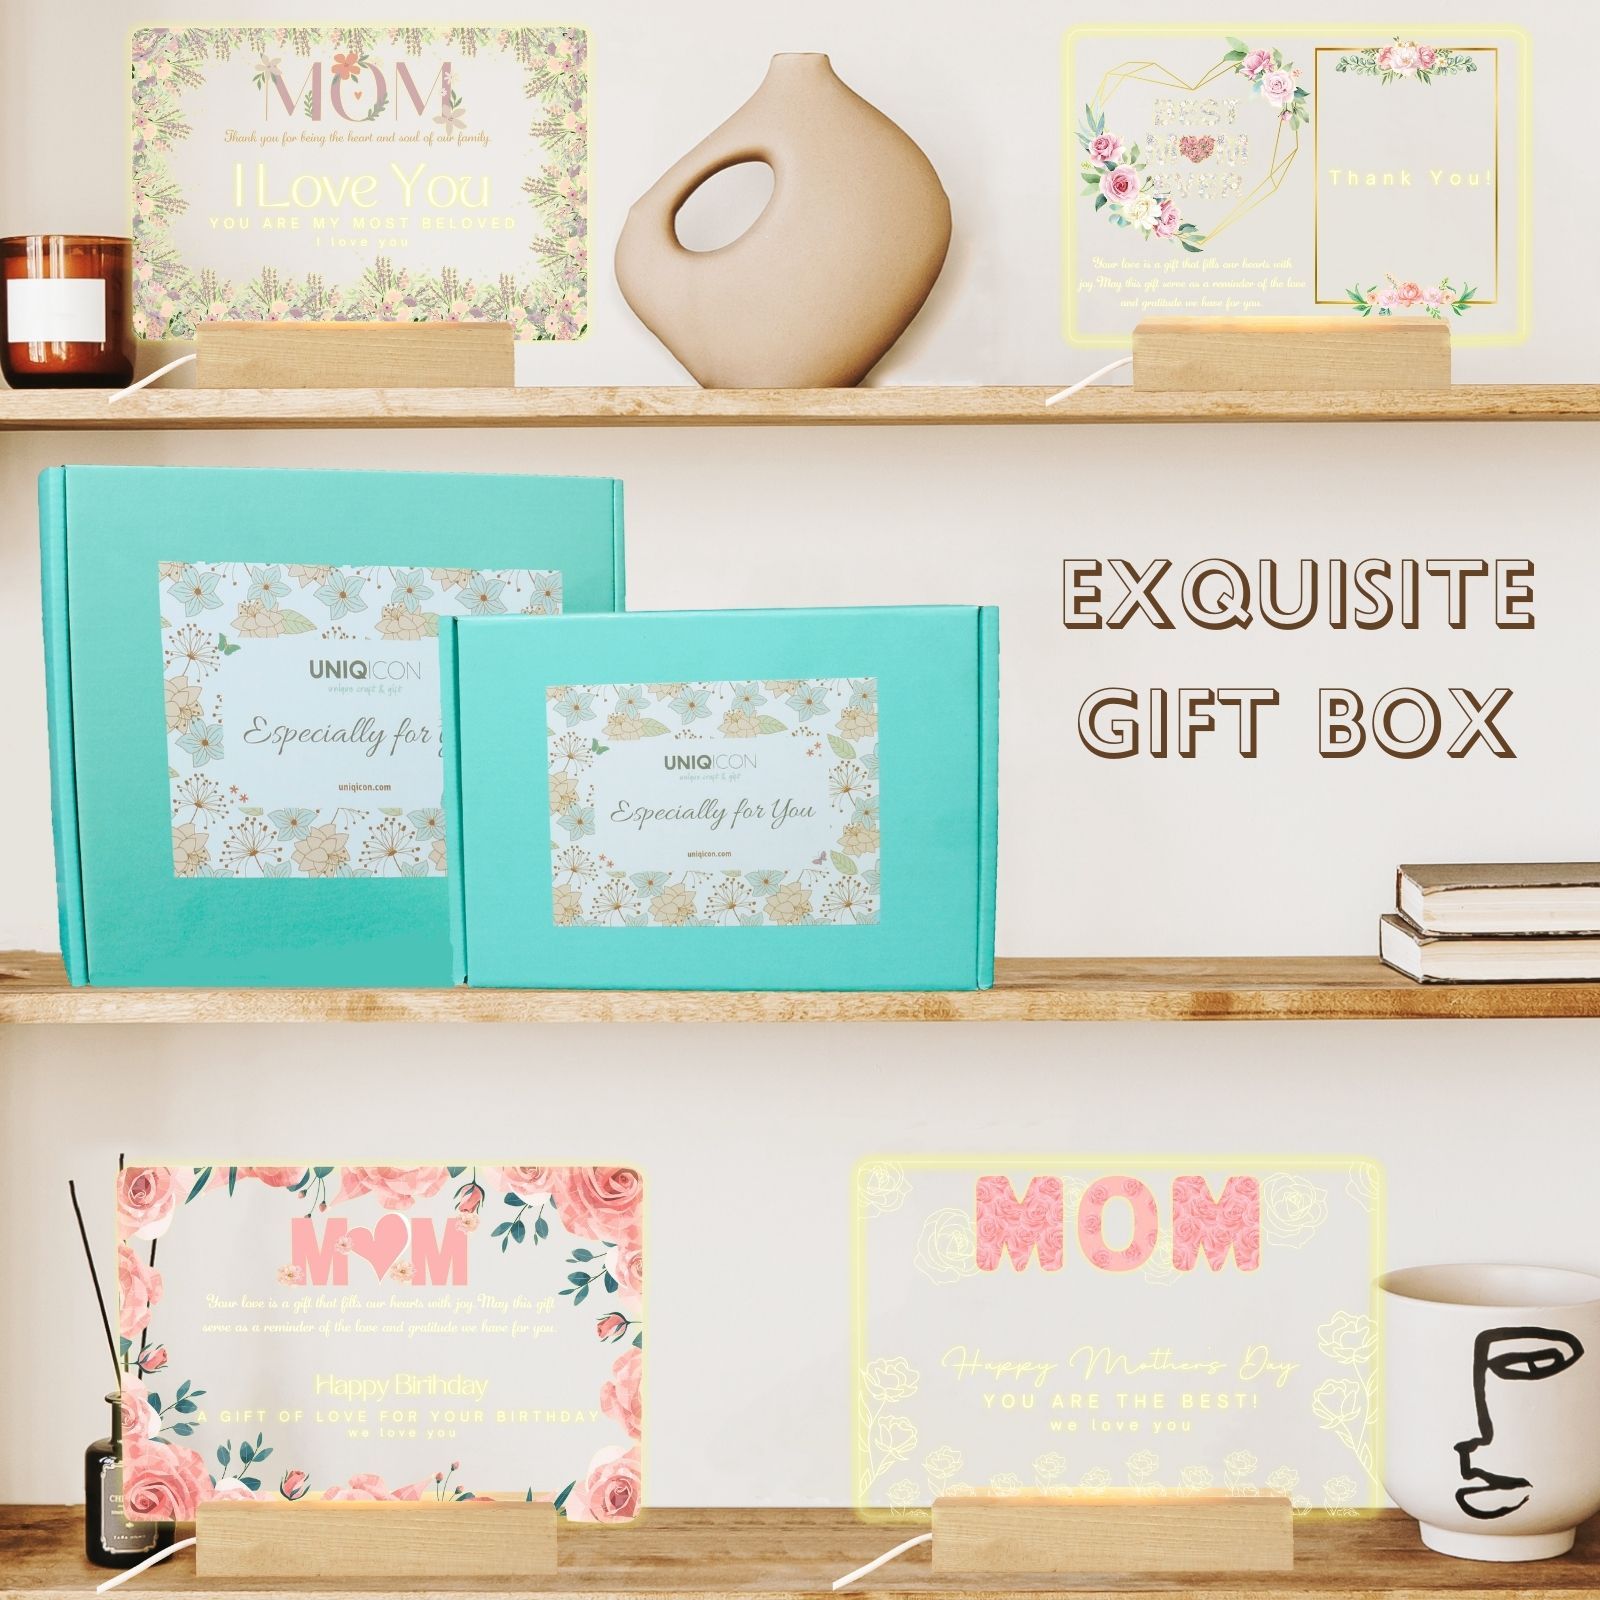 uniqicon mom gifts from daughters son custom Acrylic Desk Plaque Sign With drawing board & Wood LED Stand, Meaningful sentimental gifts for mama mother mom grandma mother in law - uniqicon